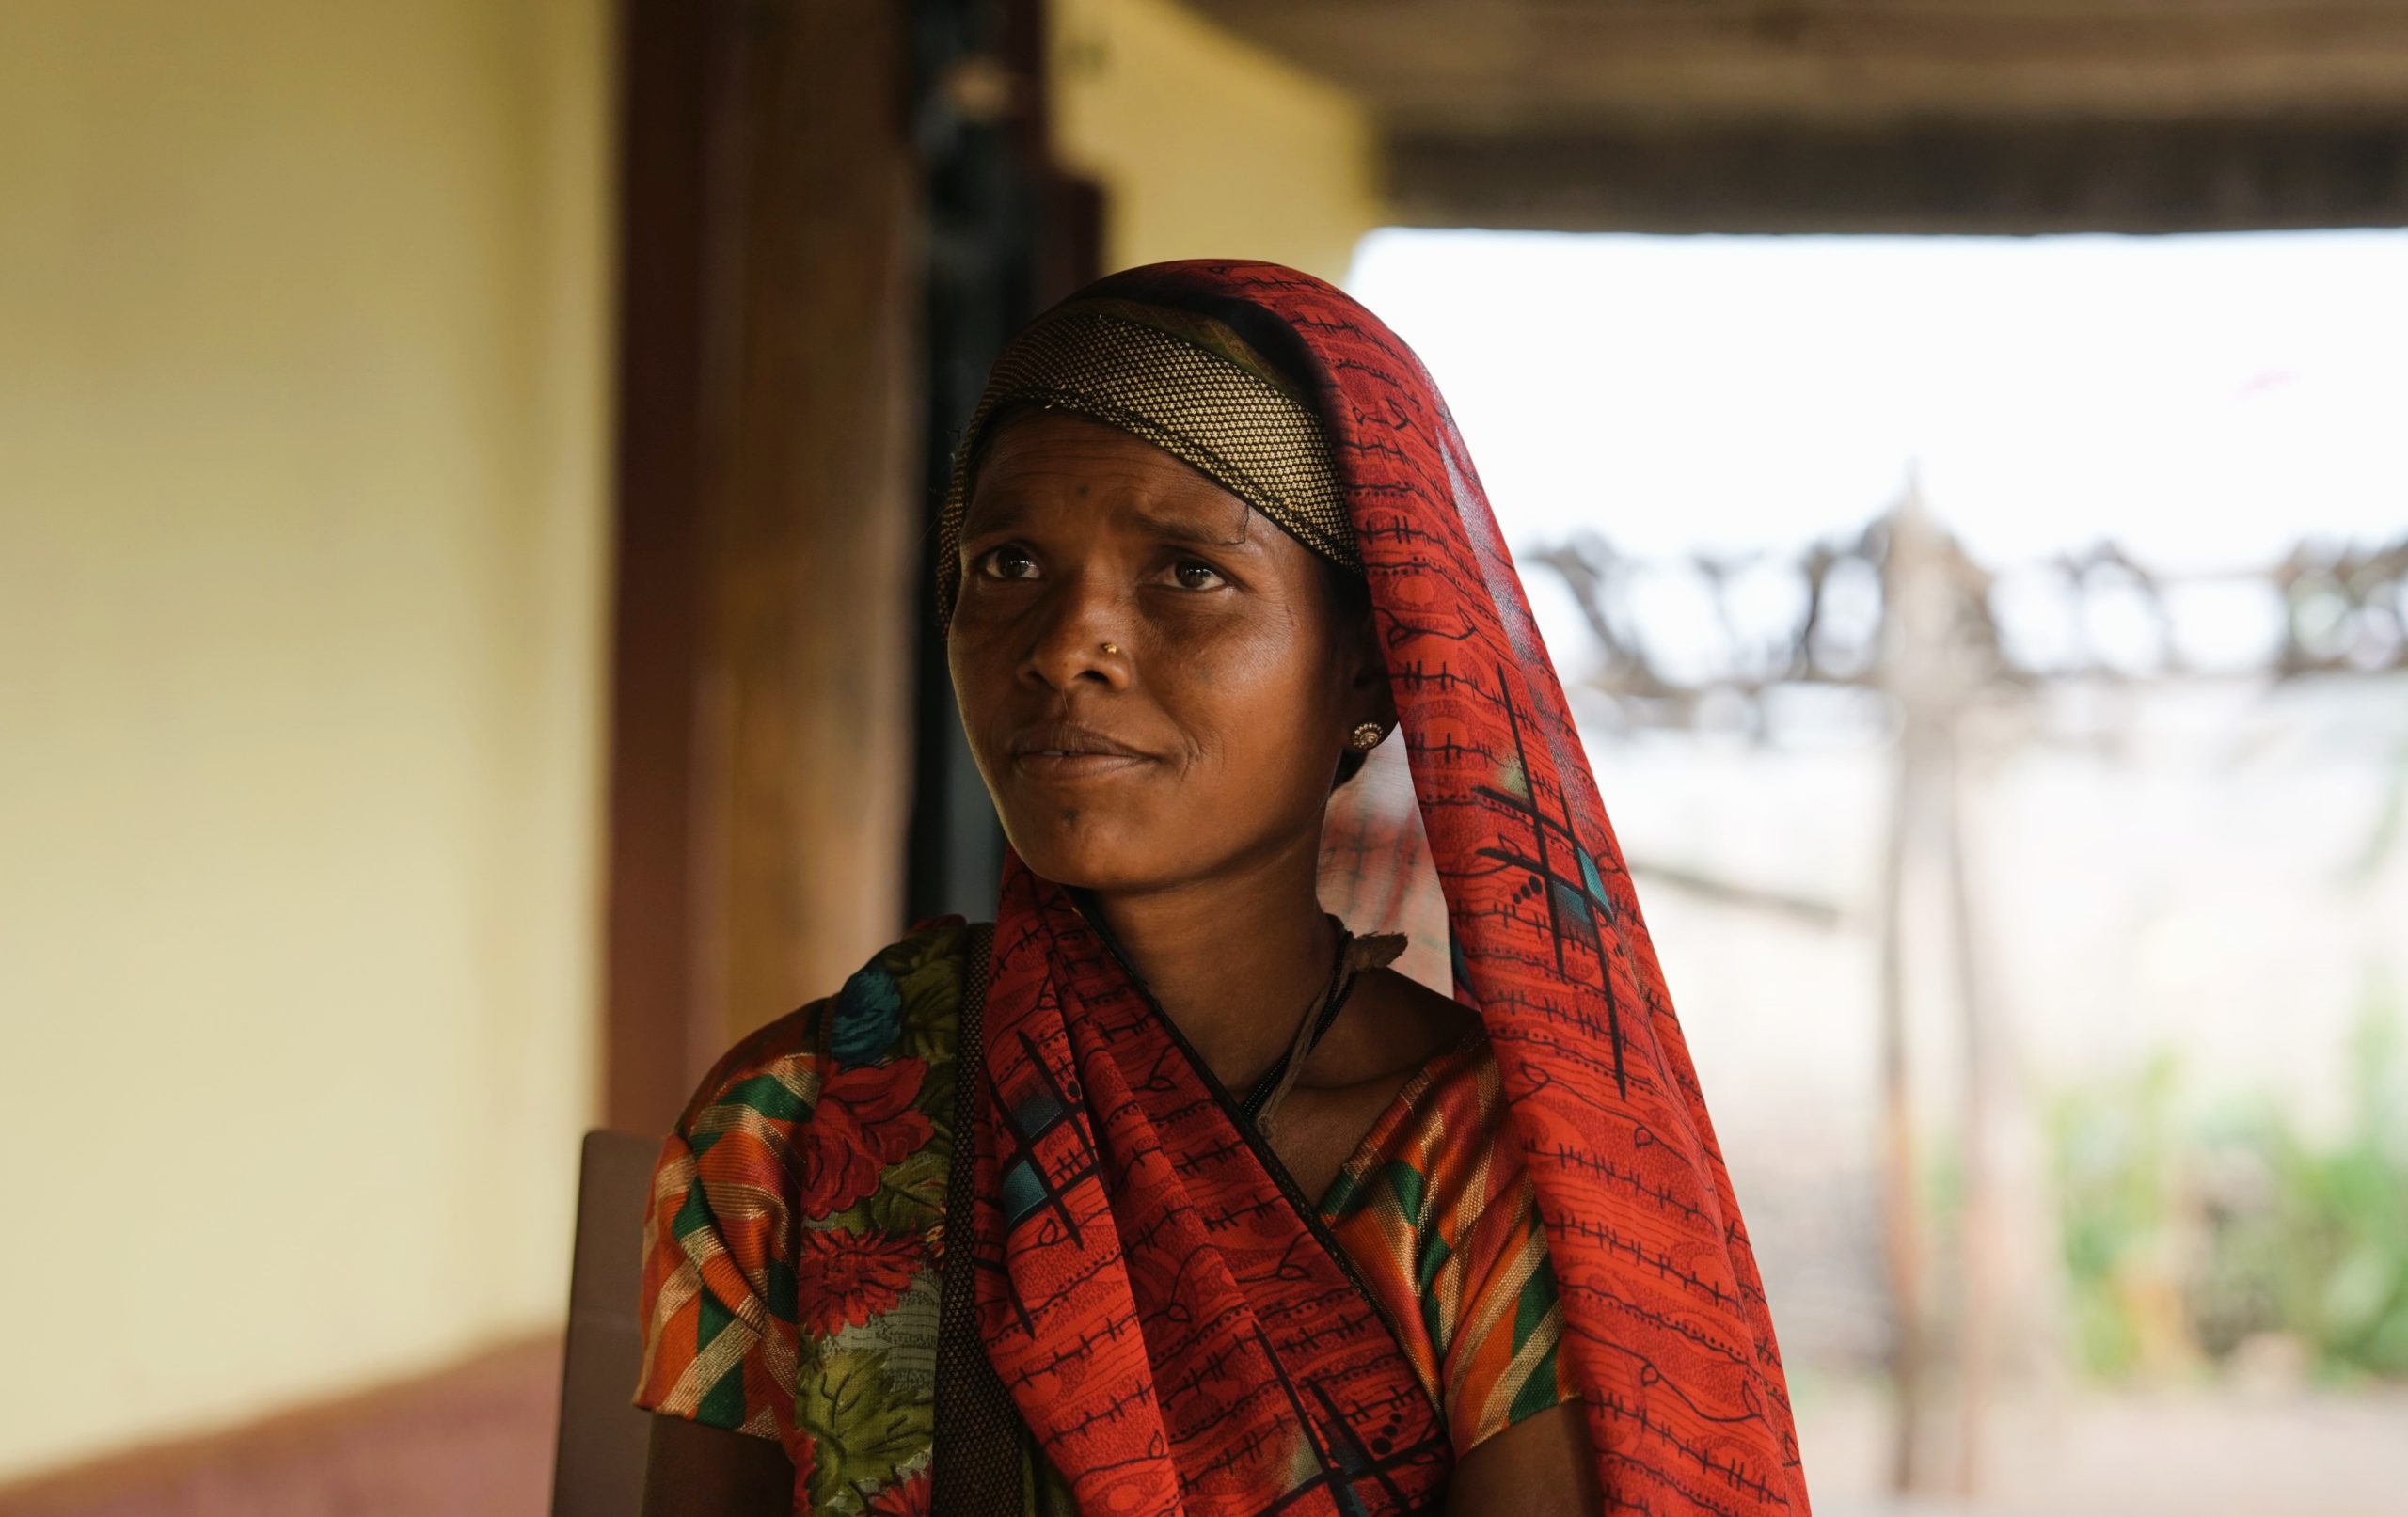 Mahan Trust: a medical NGO and lifeline for Melghat’s tribal communities